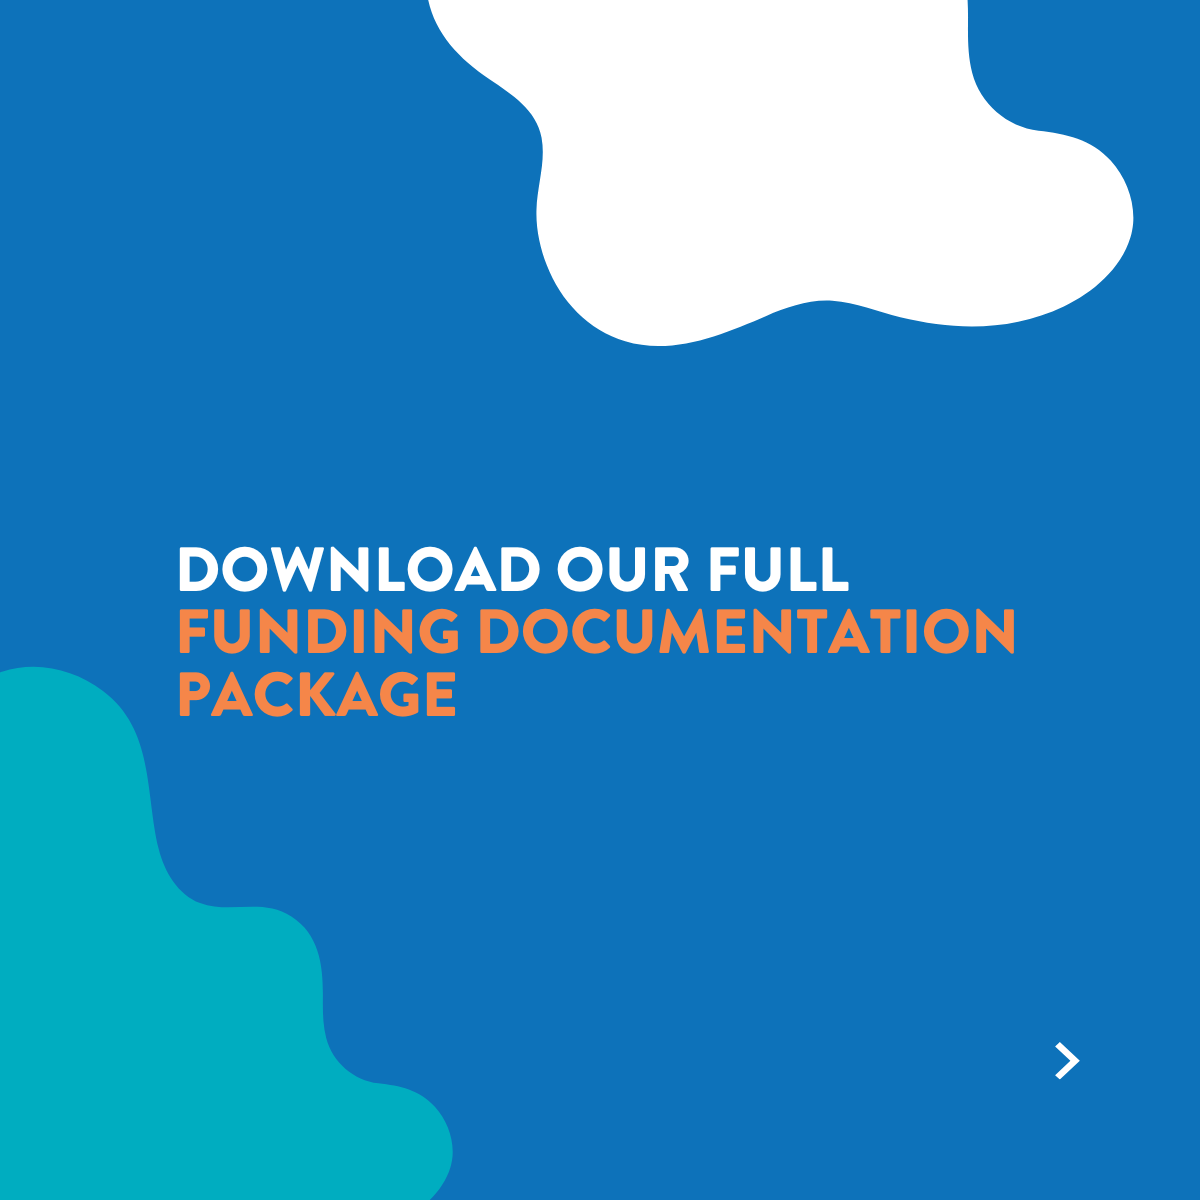 Download our full funding documentation package